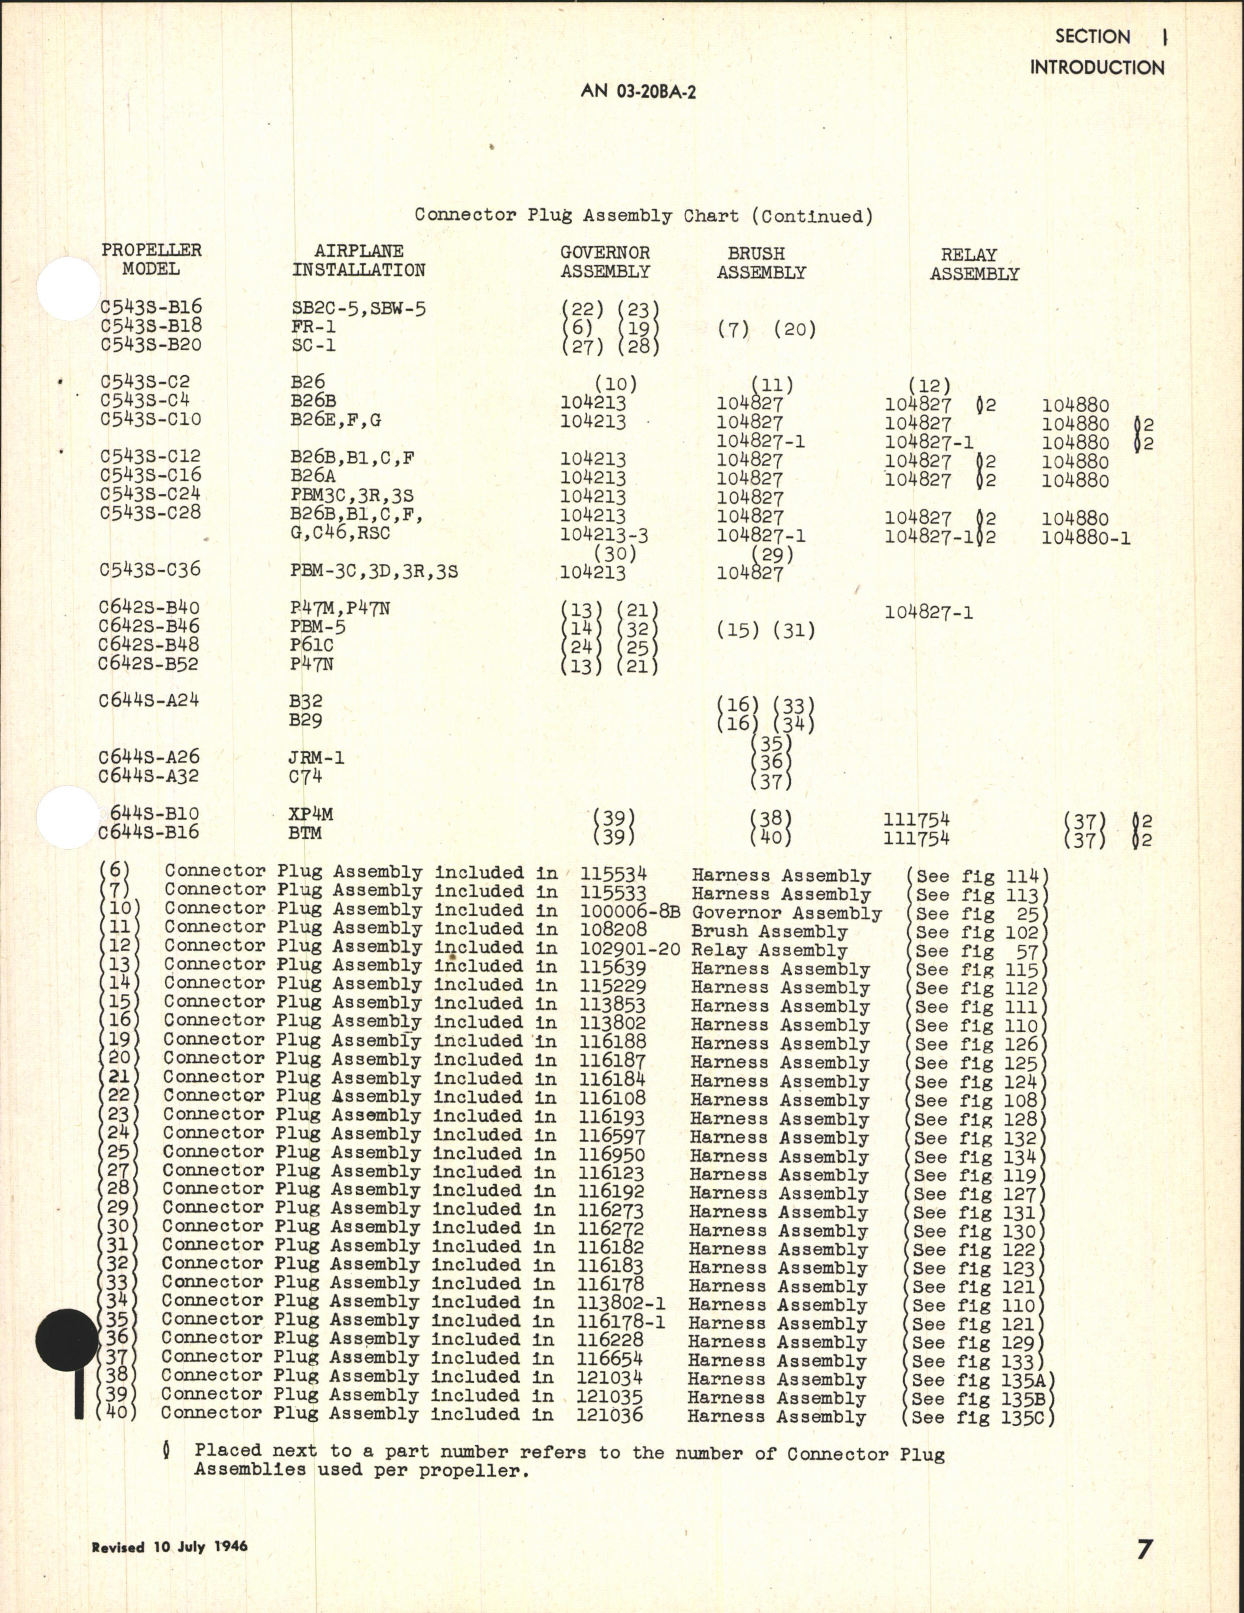 Sample page 7 from AirCorps Library document: Parts Catalog for Electric Propeller Control System